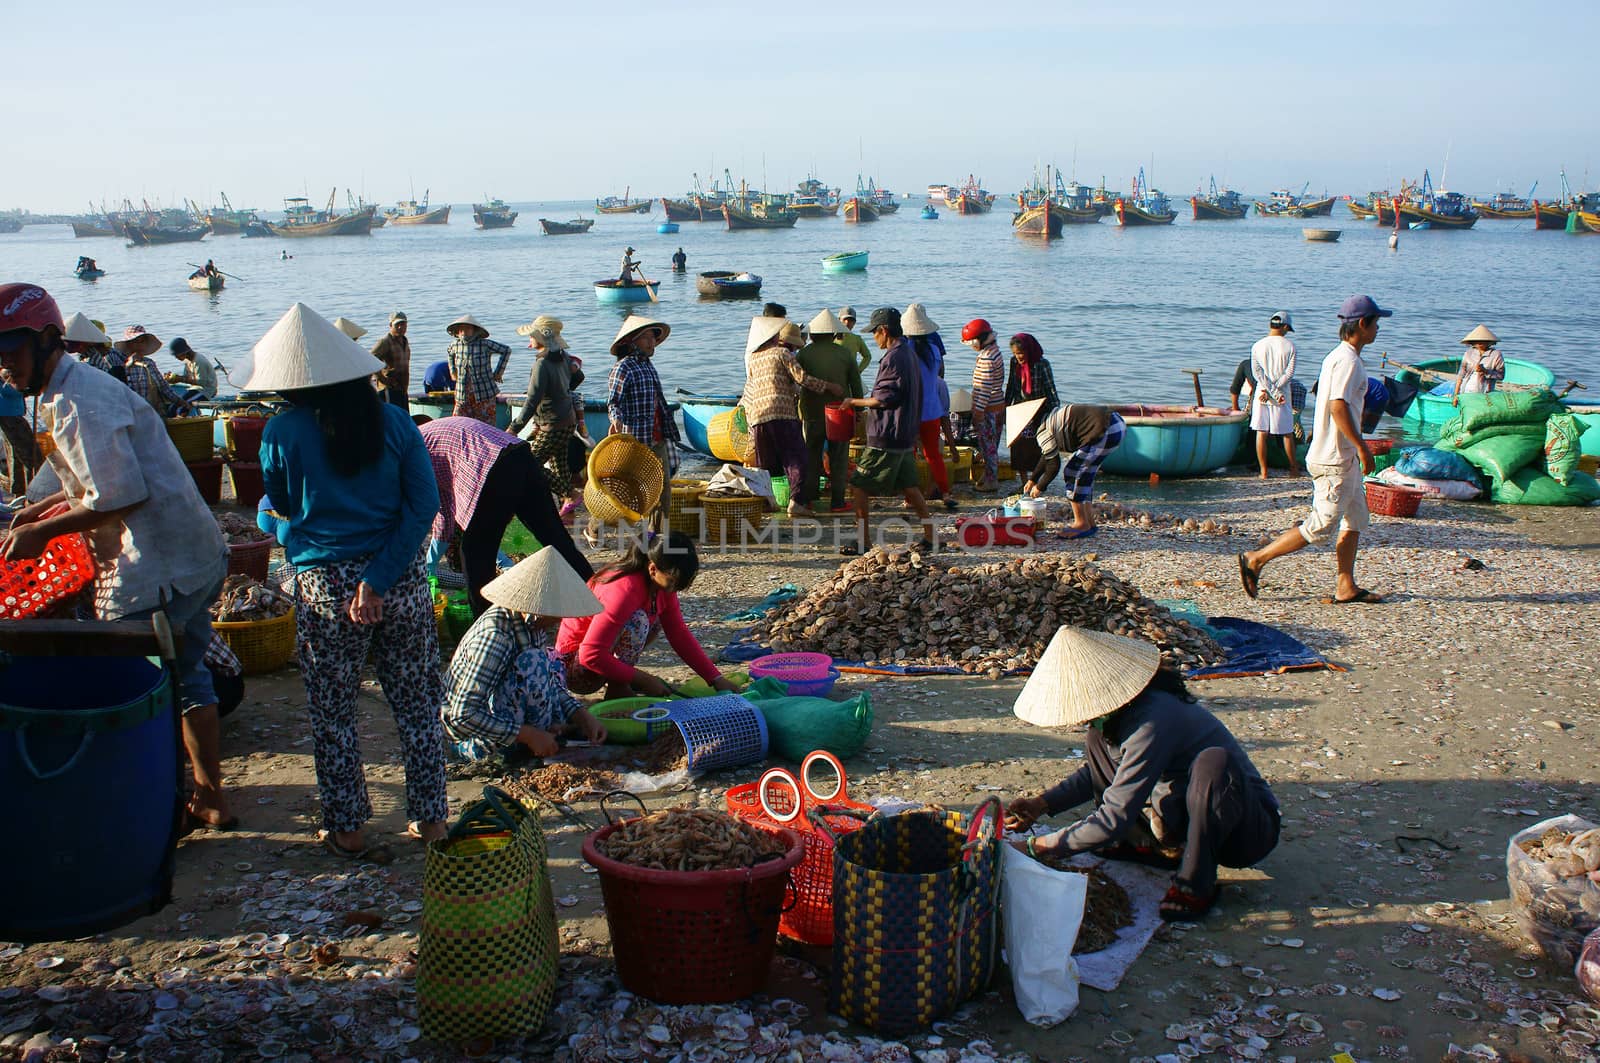  Crowed atmosphere at seafood market on beach by xuanhuongho